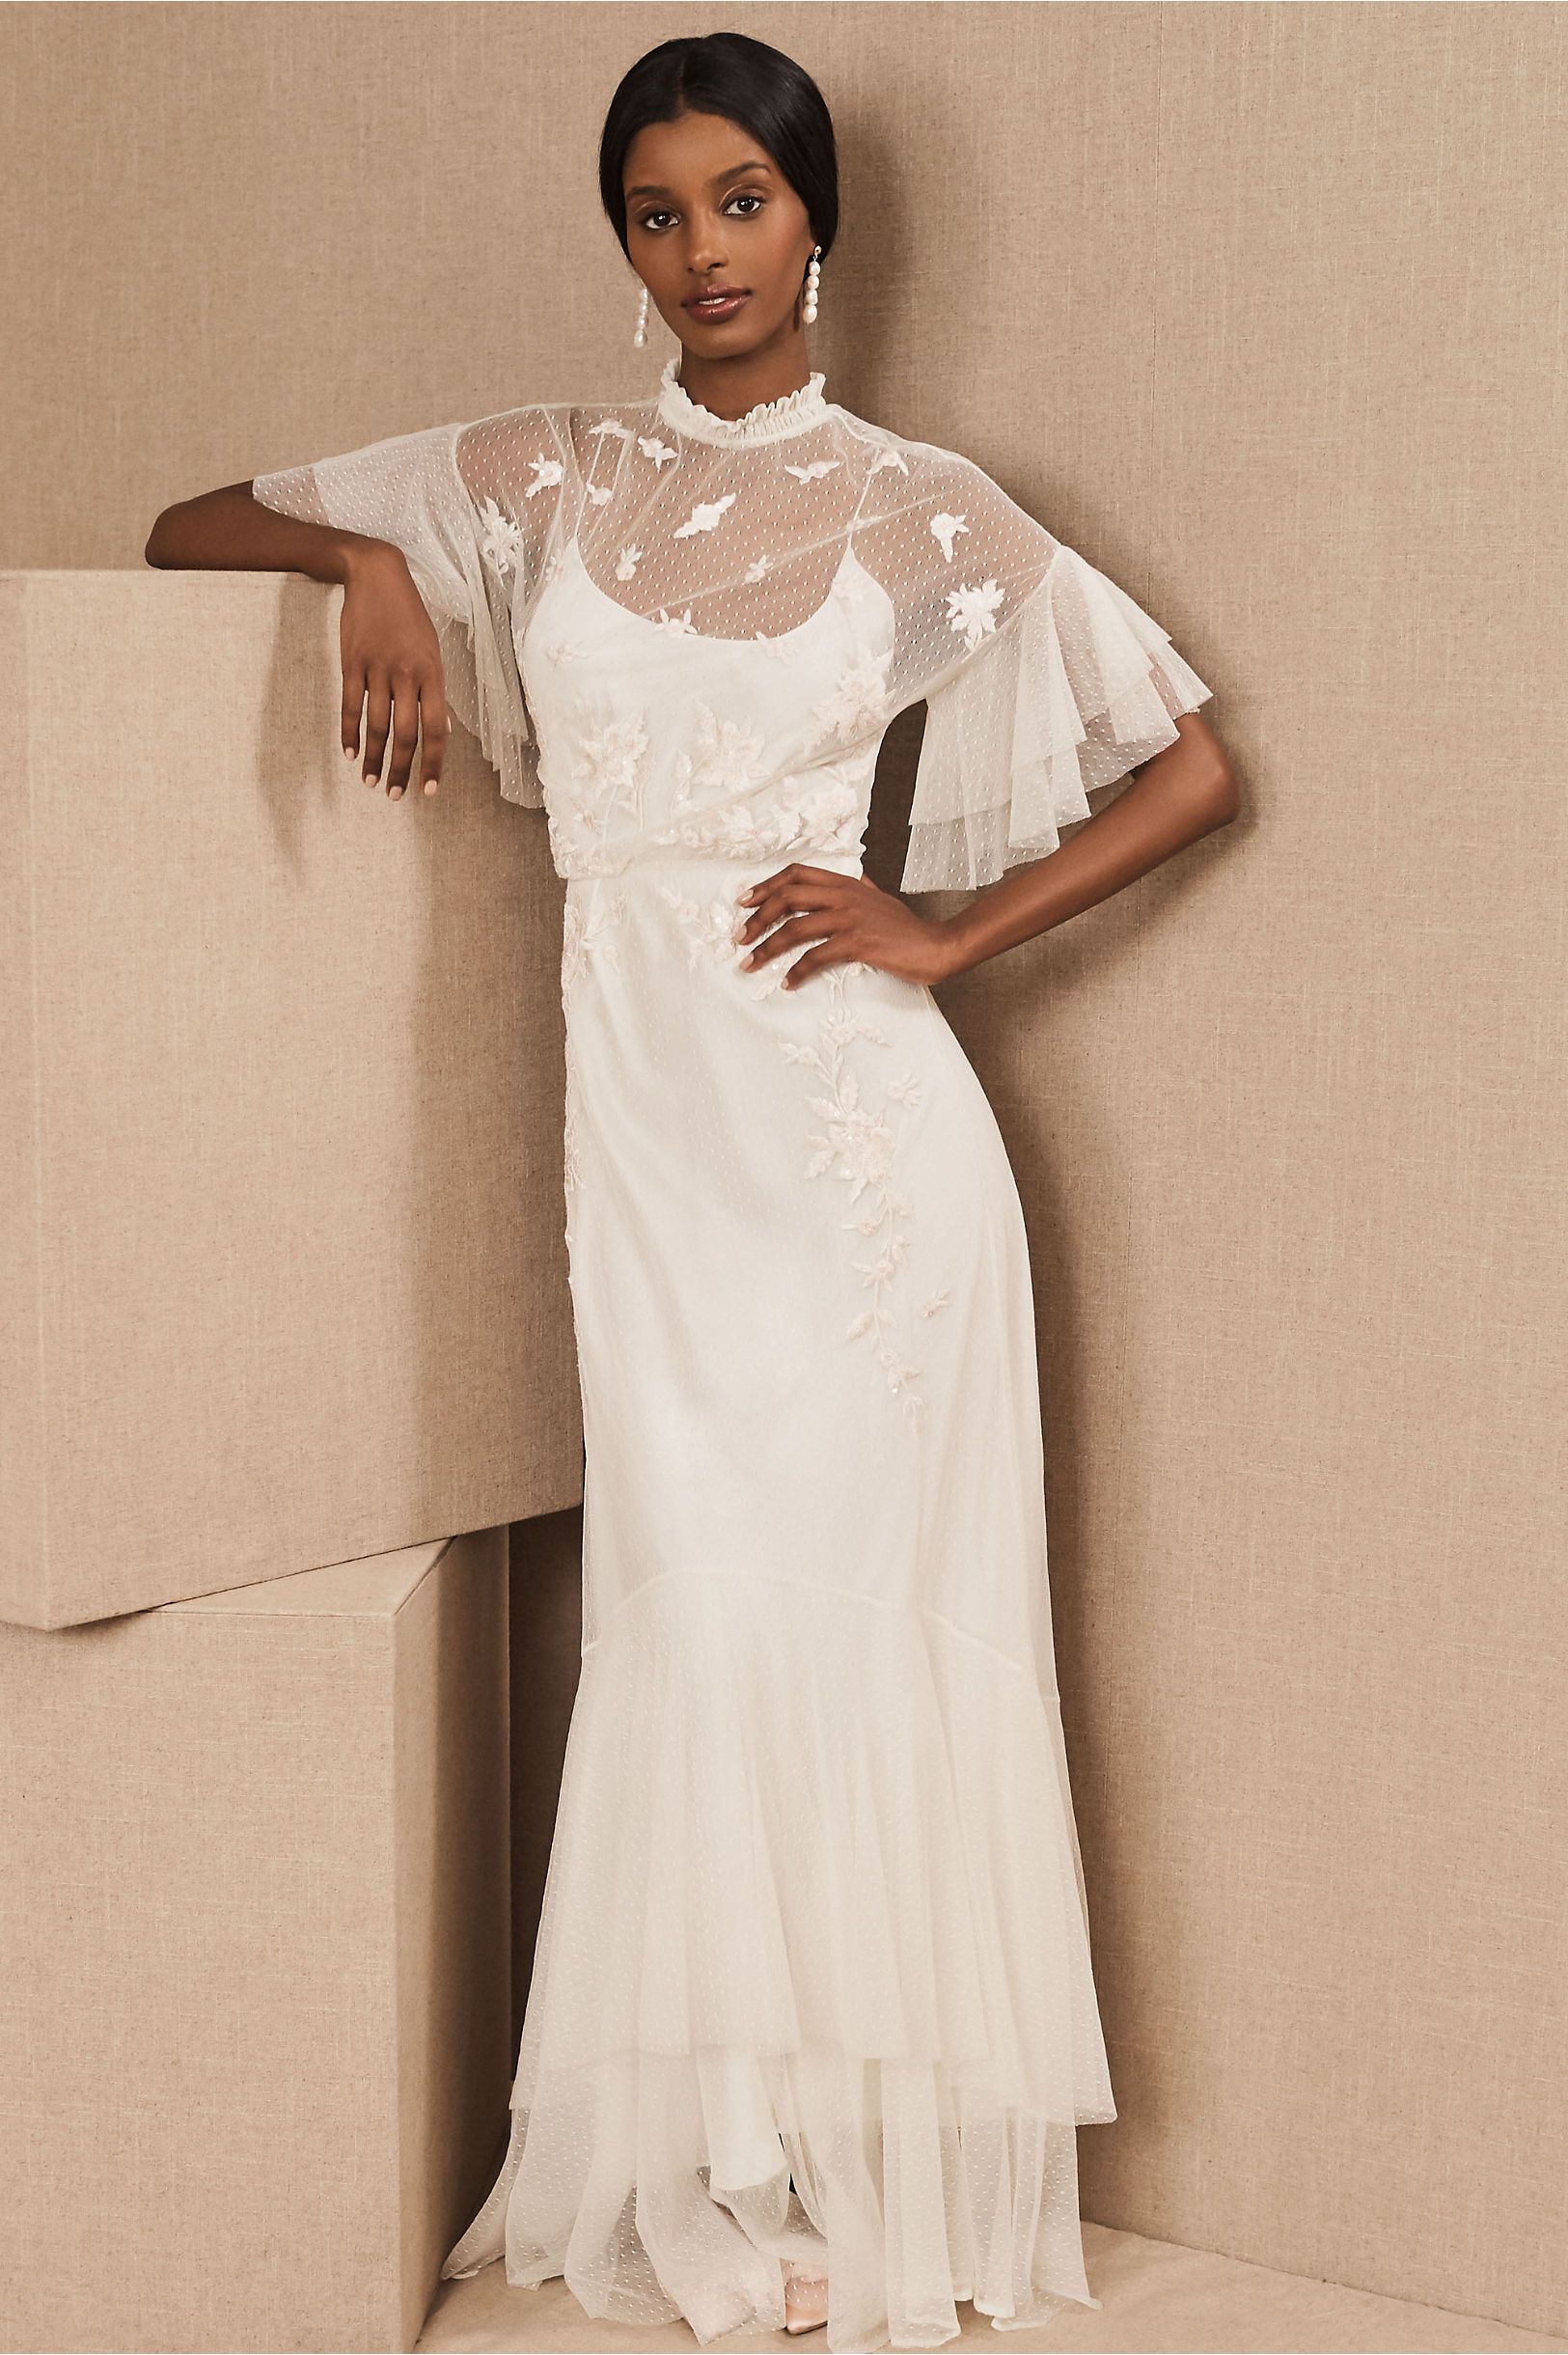 Woman with dark hair in BHLDN white lace wedding dress